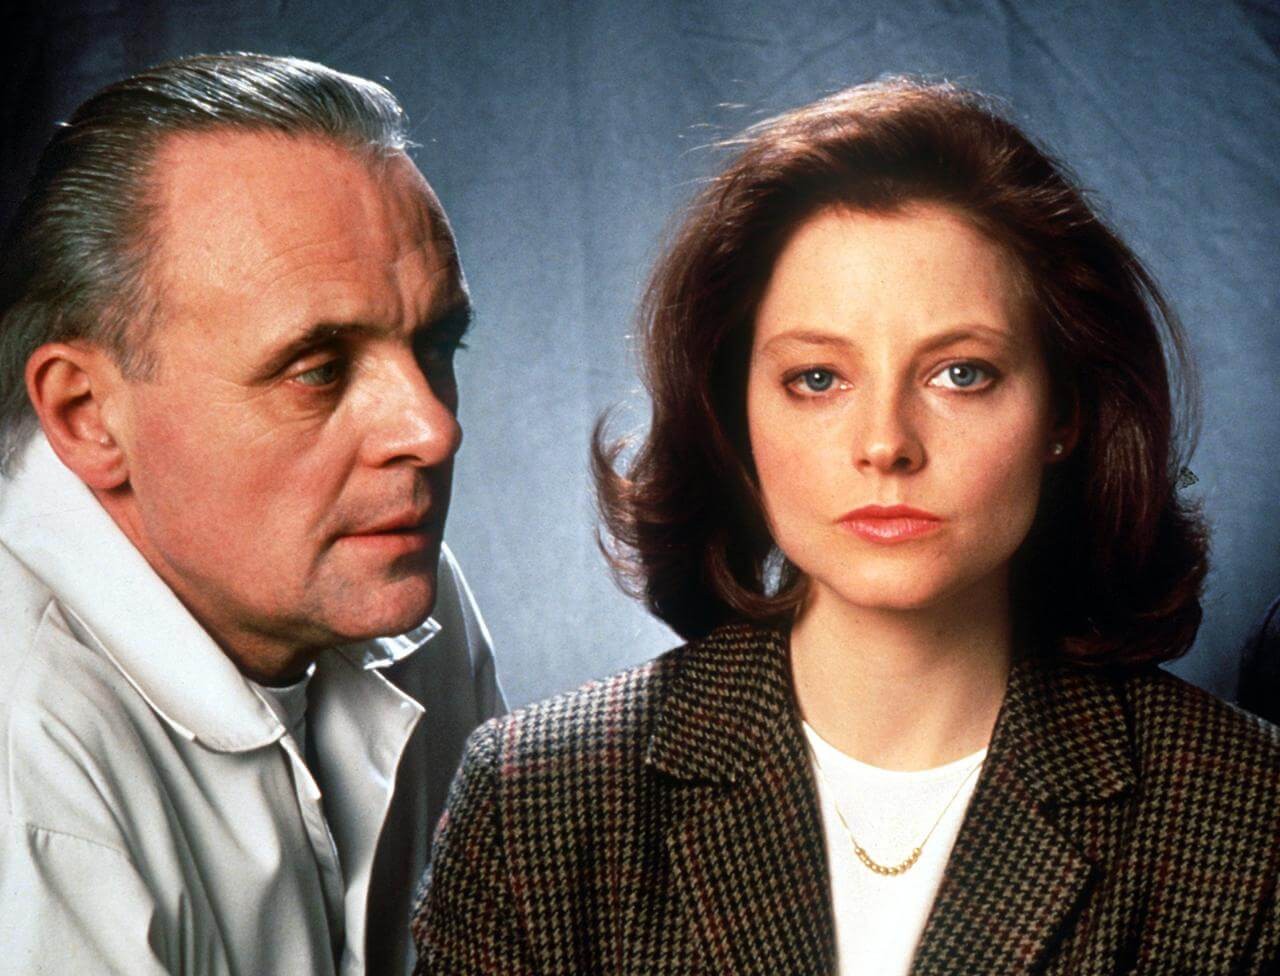 Jodie Foster and Anthony Hopkins in Silence of the Lambs (1991)